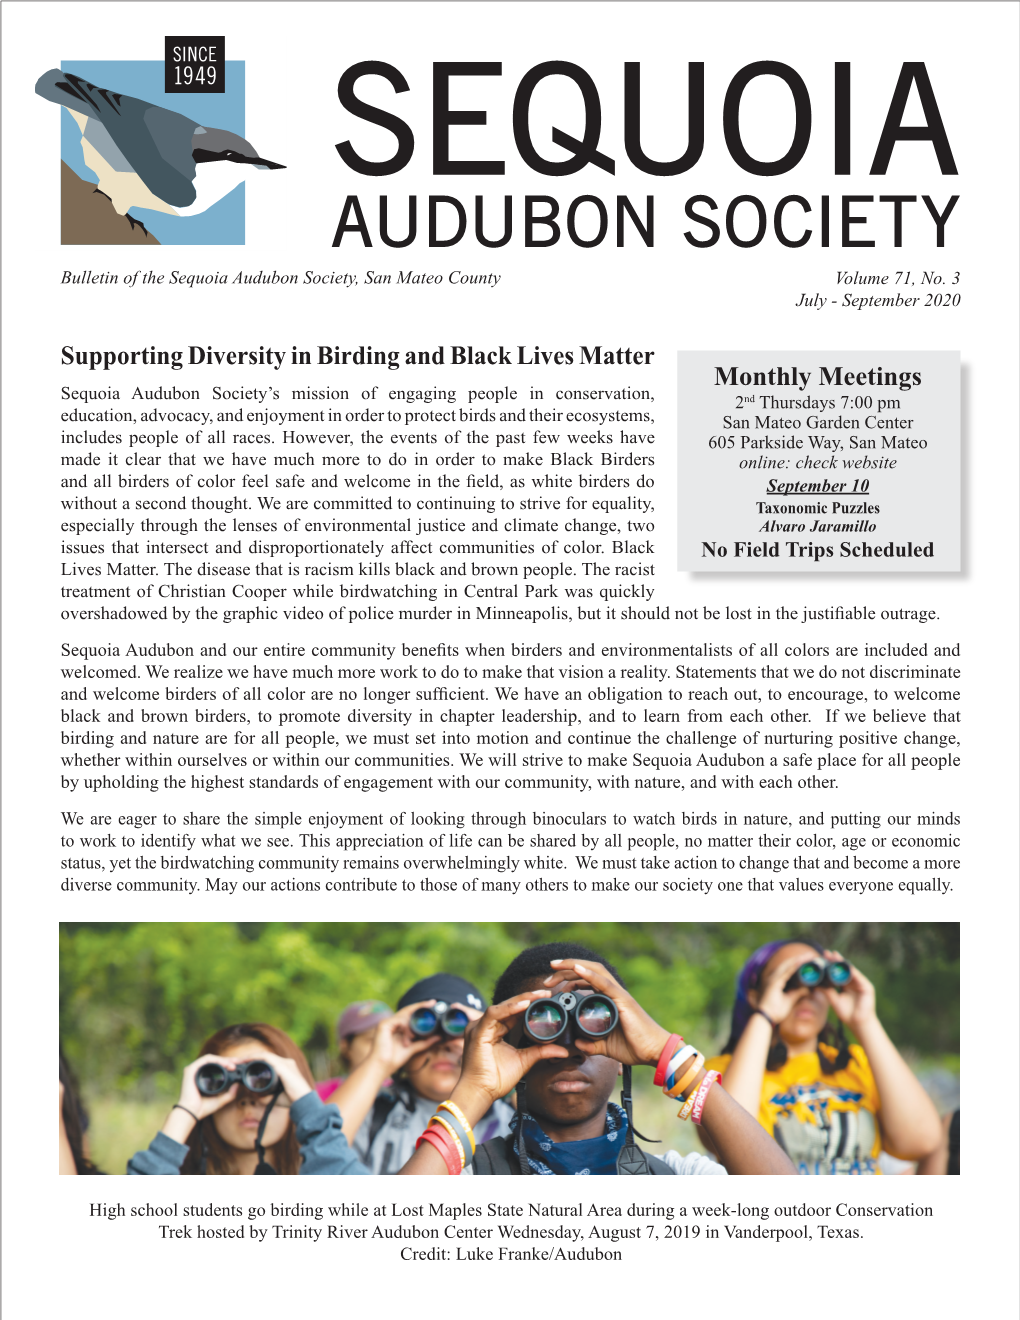 Monthly Meetings Supporting Diversity in Birding and Black Lives Matter